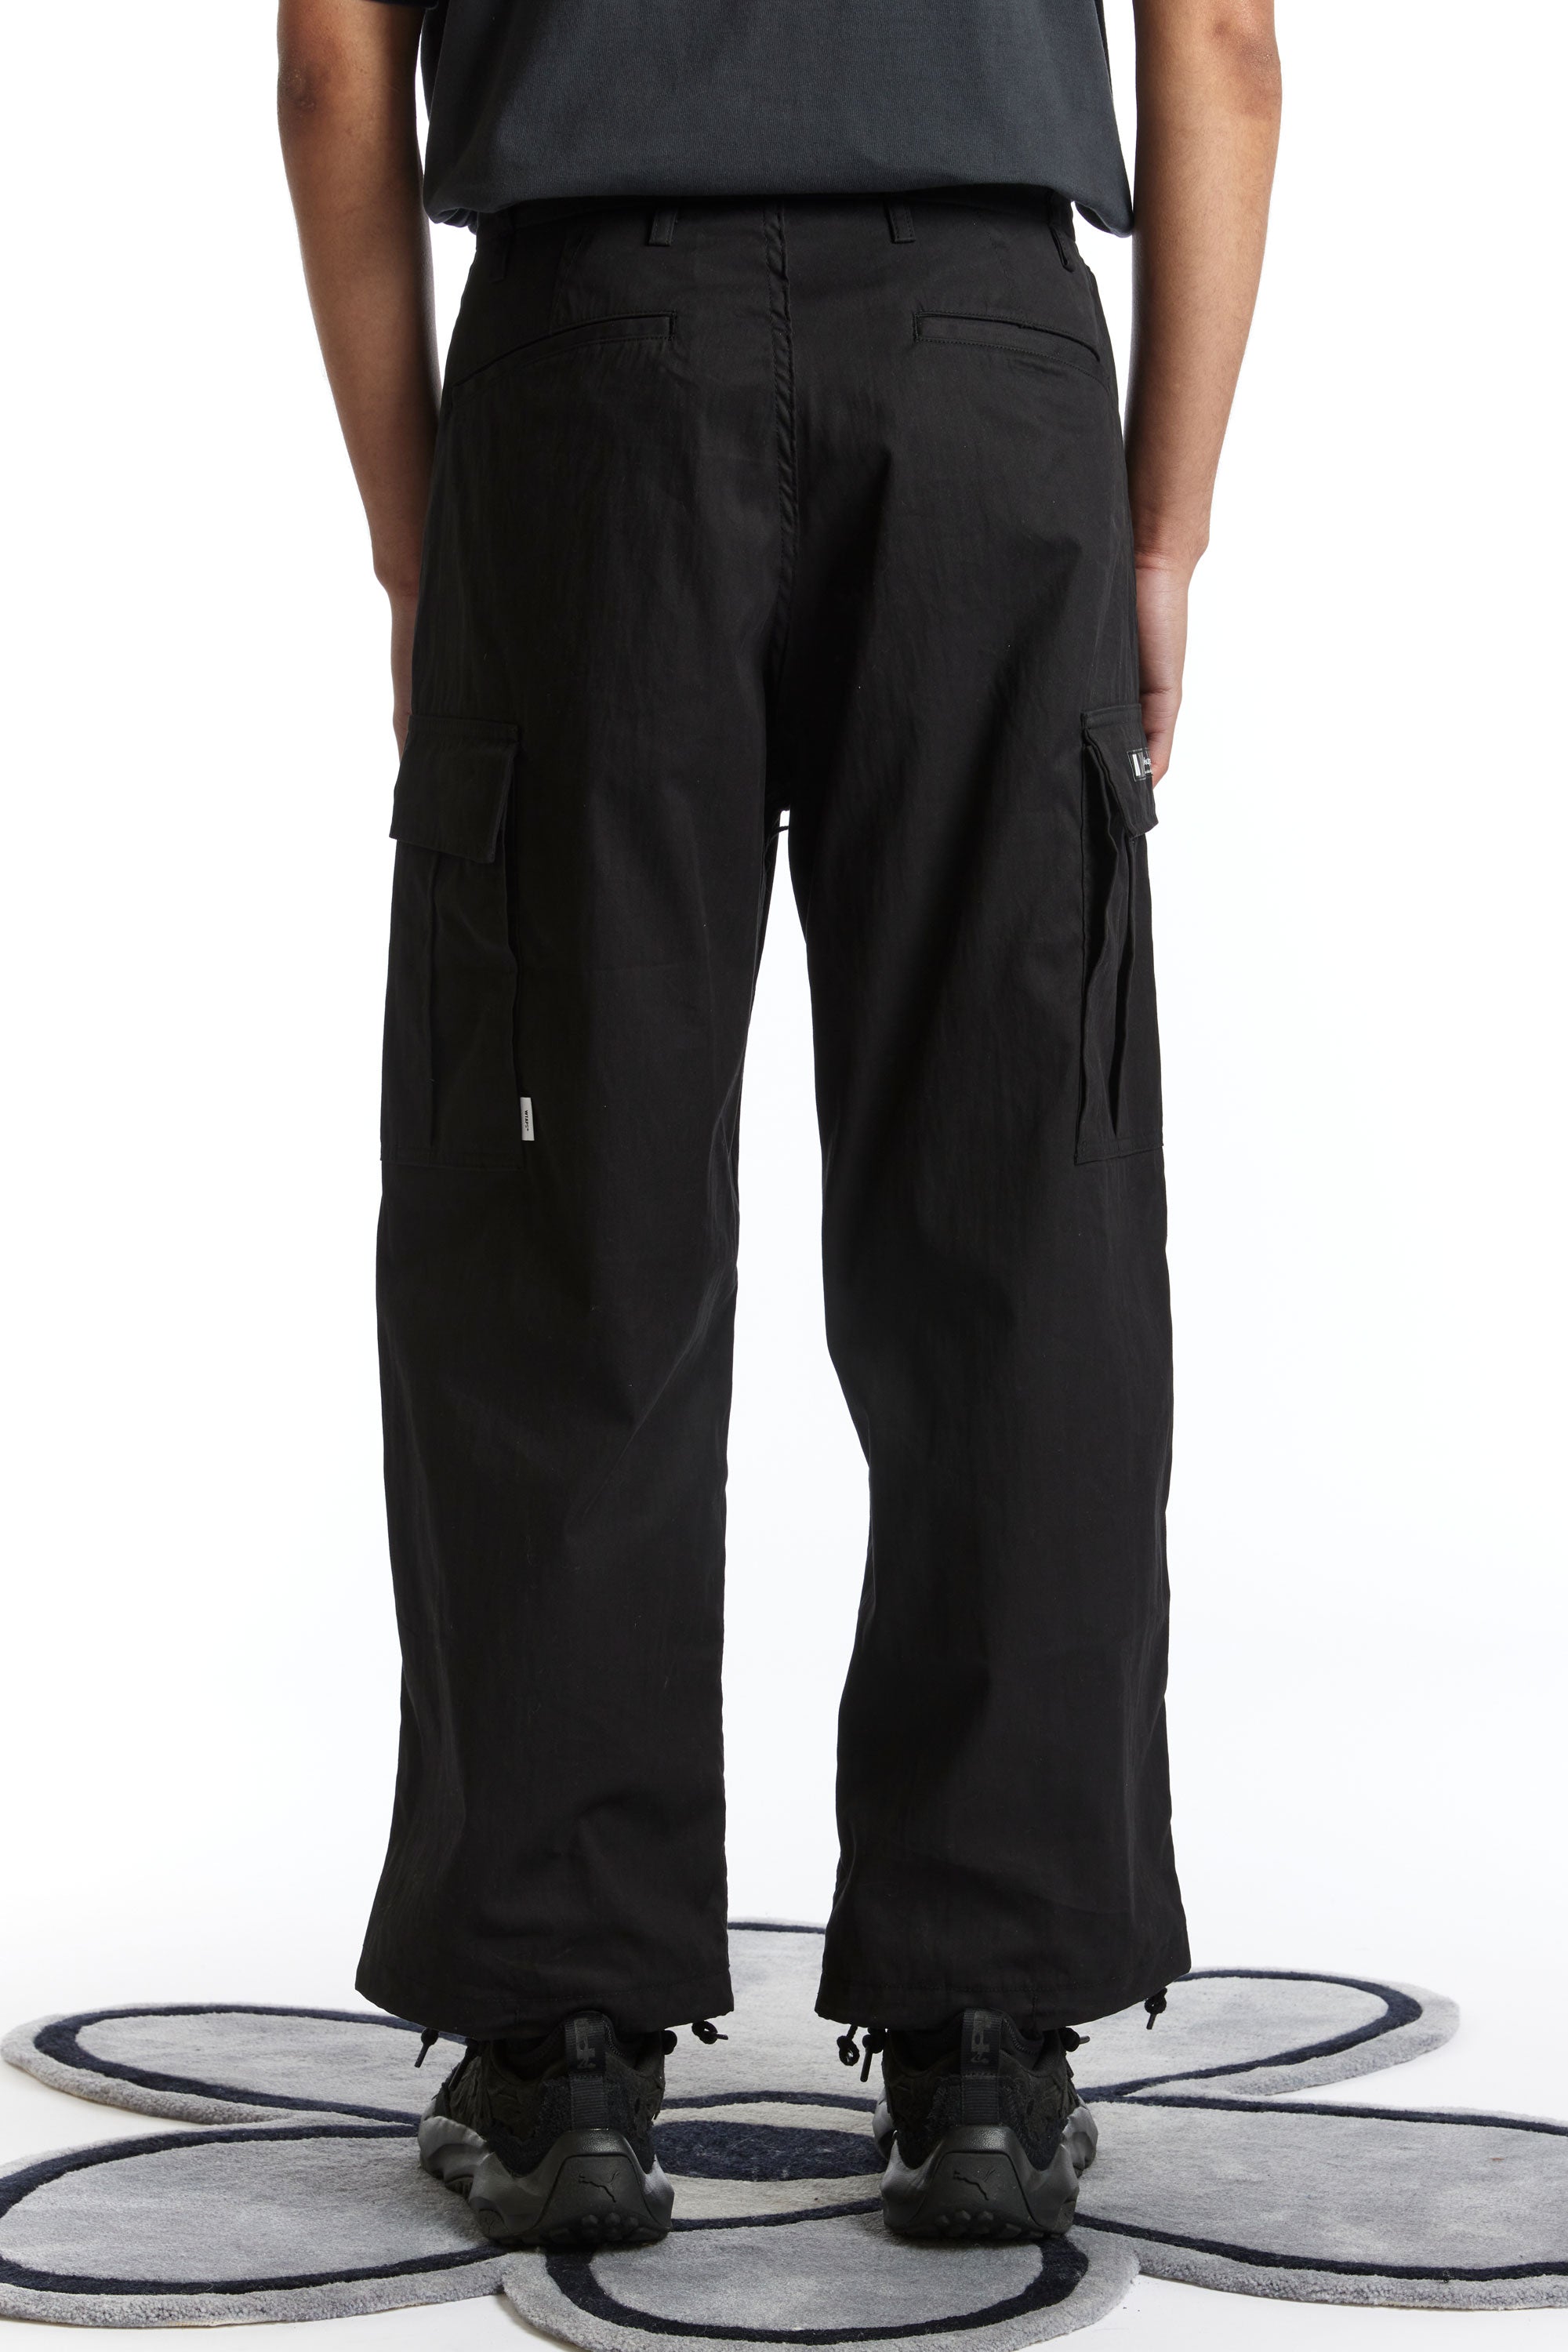 The WTAPS - MILT0001 TROUSERS  available online with global shipping, and in PAM Stores Melbourne and Sydney.